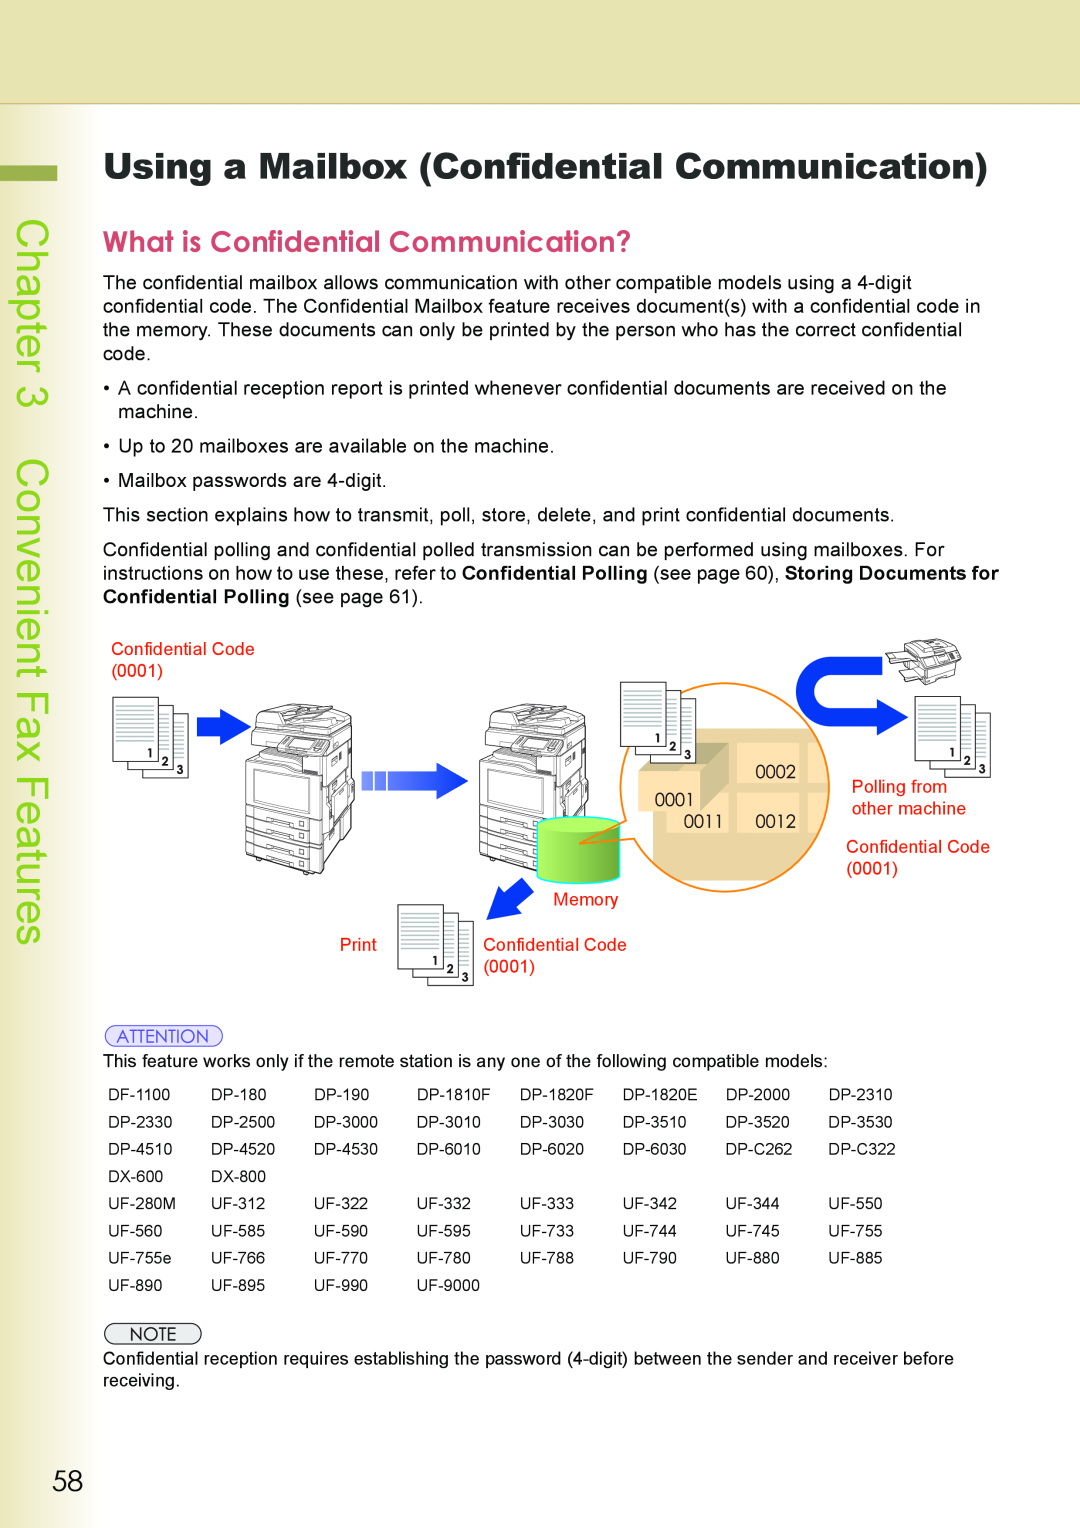 Philips DP-C262 Convenient, Fax Features, Using a Mailbox Confidential Communication, What is Confidential Communication? 